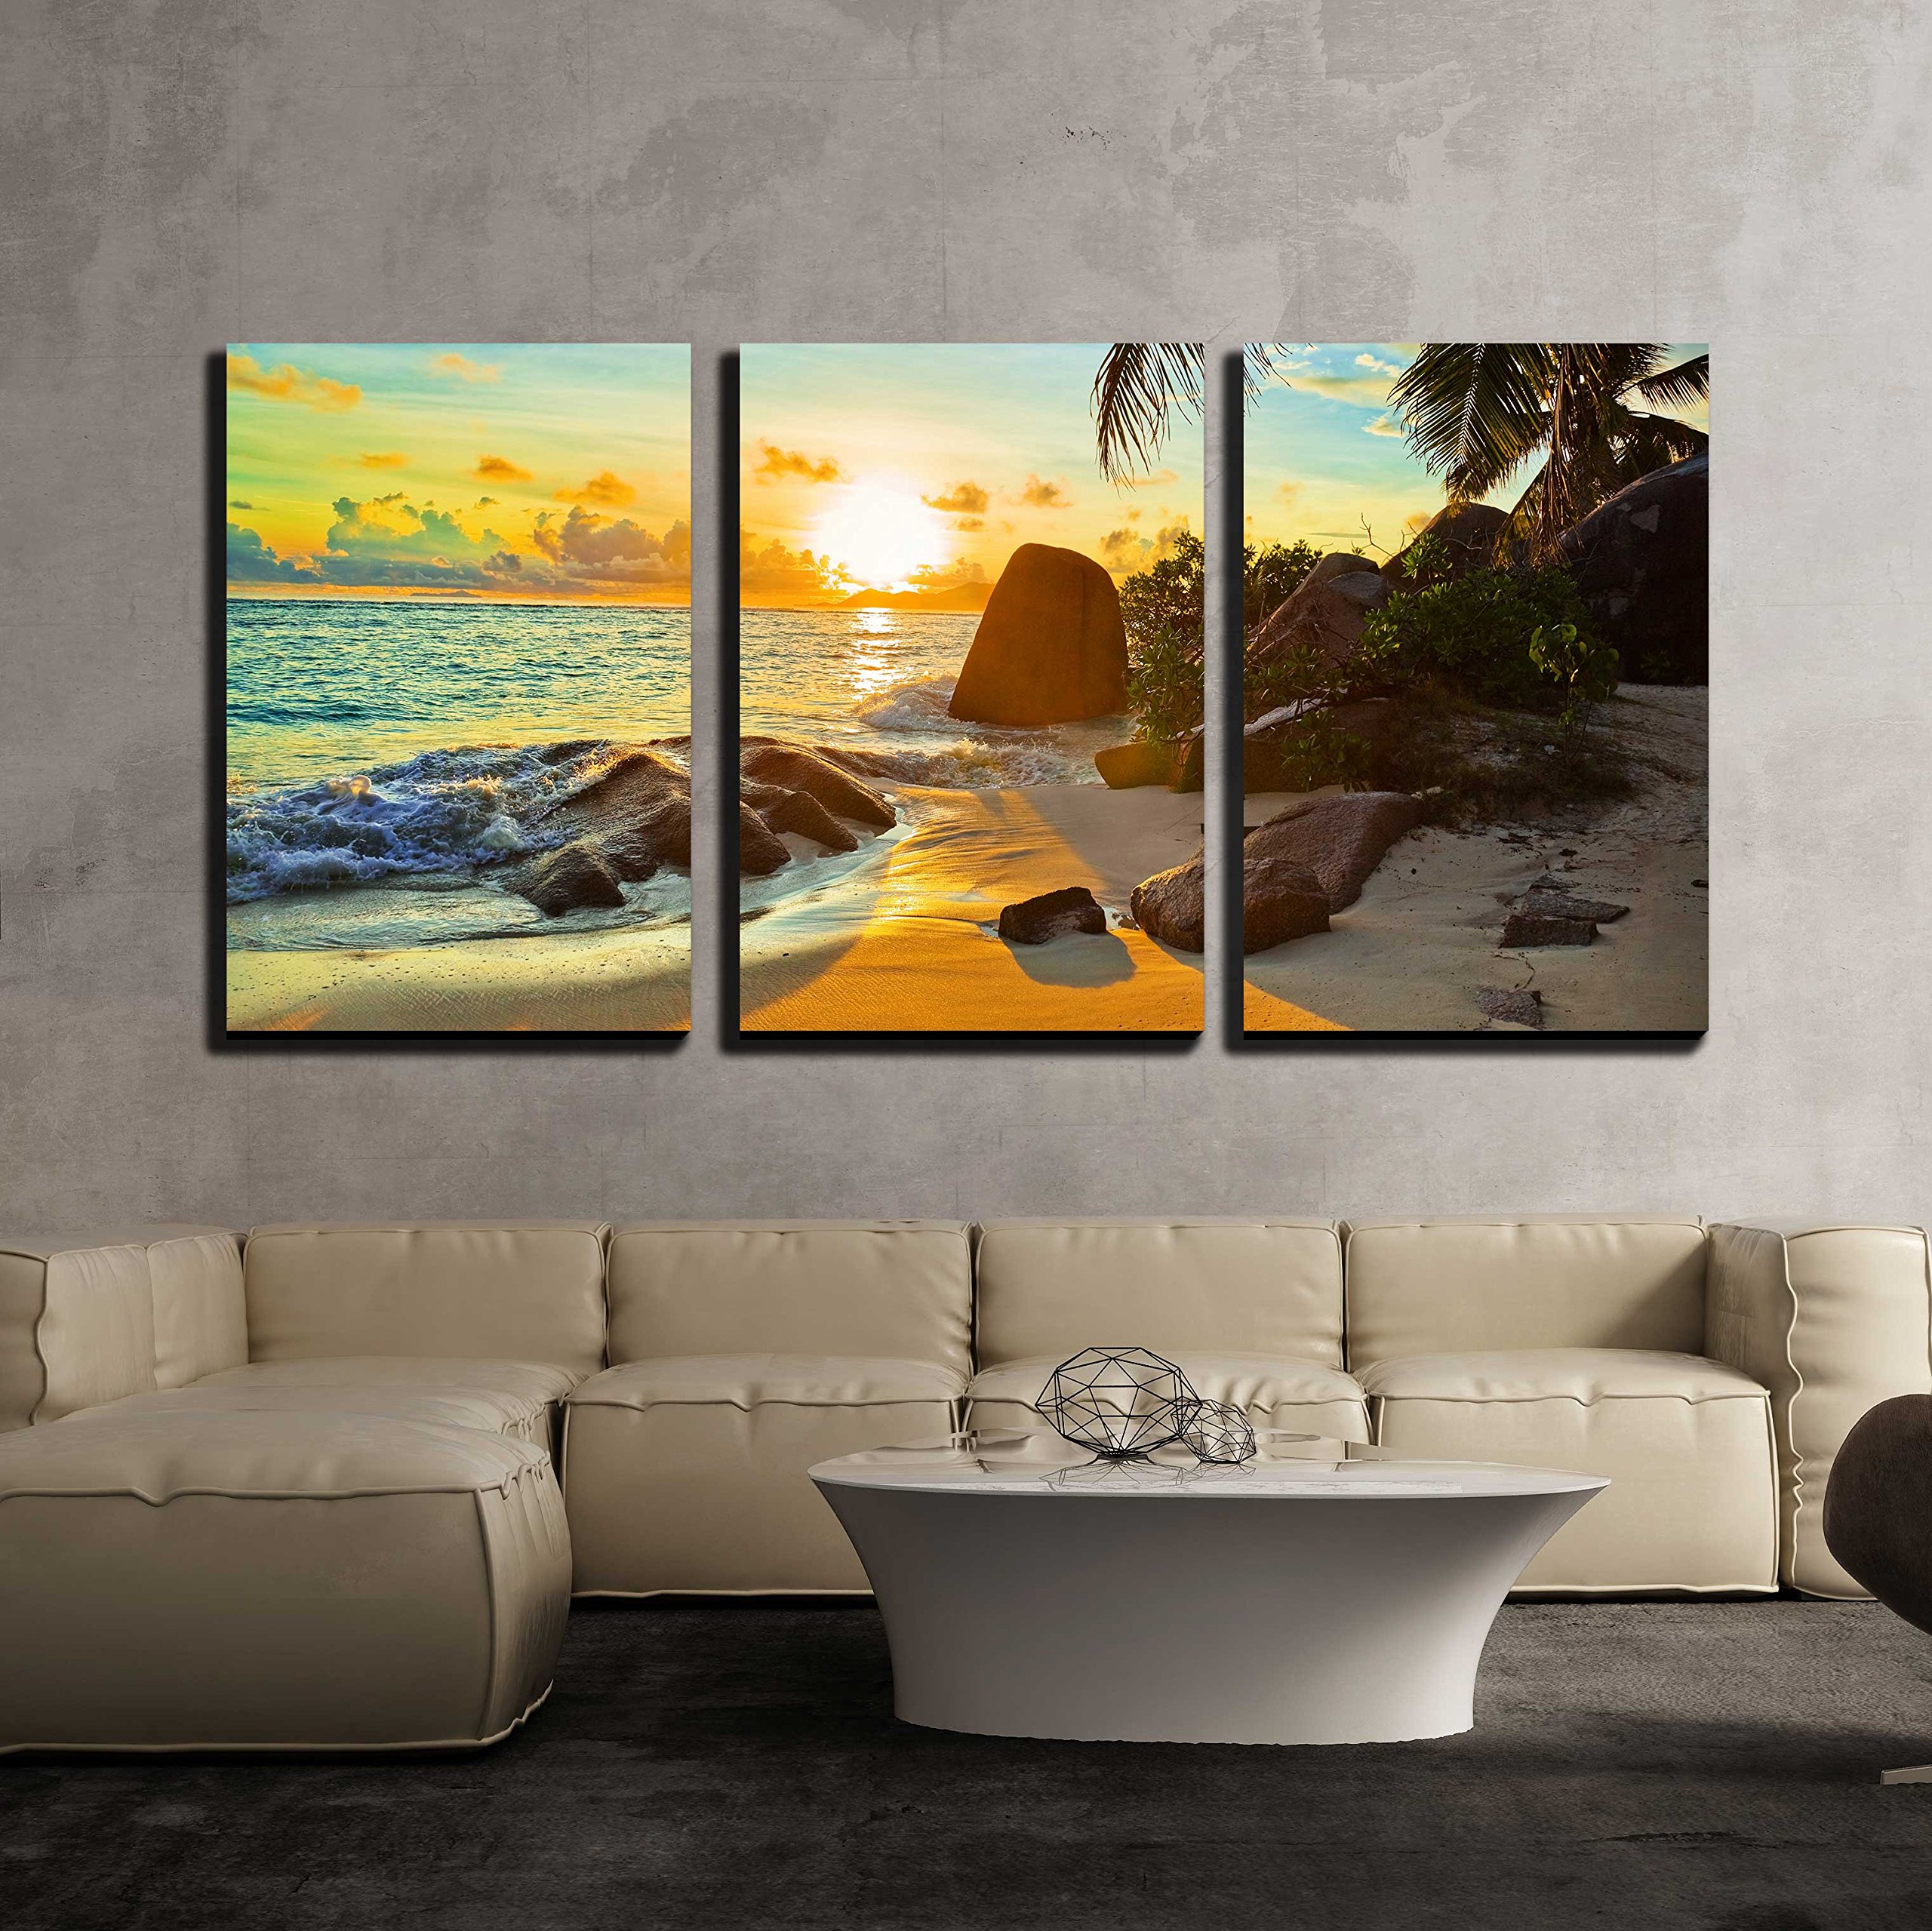 wall26 - 3 Piece Canvas Wall Art - Tropical Beach at Sunset - Nature Background - Modern Home Art Stretched and Framed Ready to Hang - 16&quot;x24&quot;x3 Panels - image 1 of 4